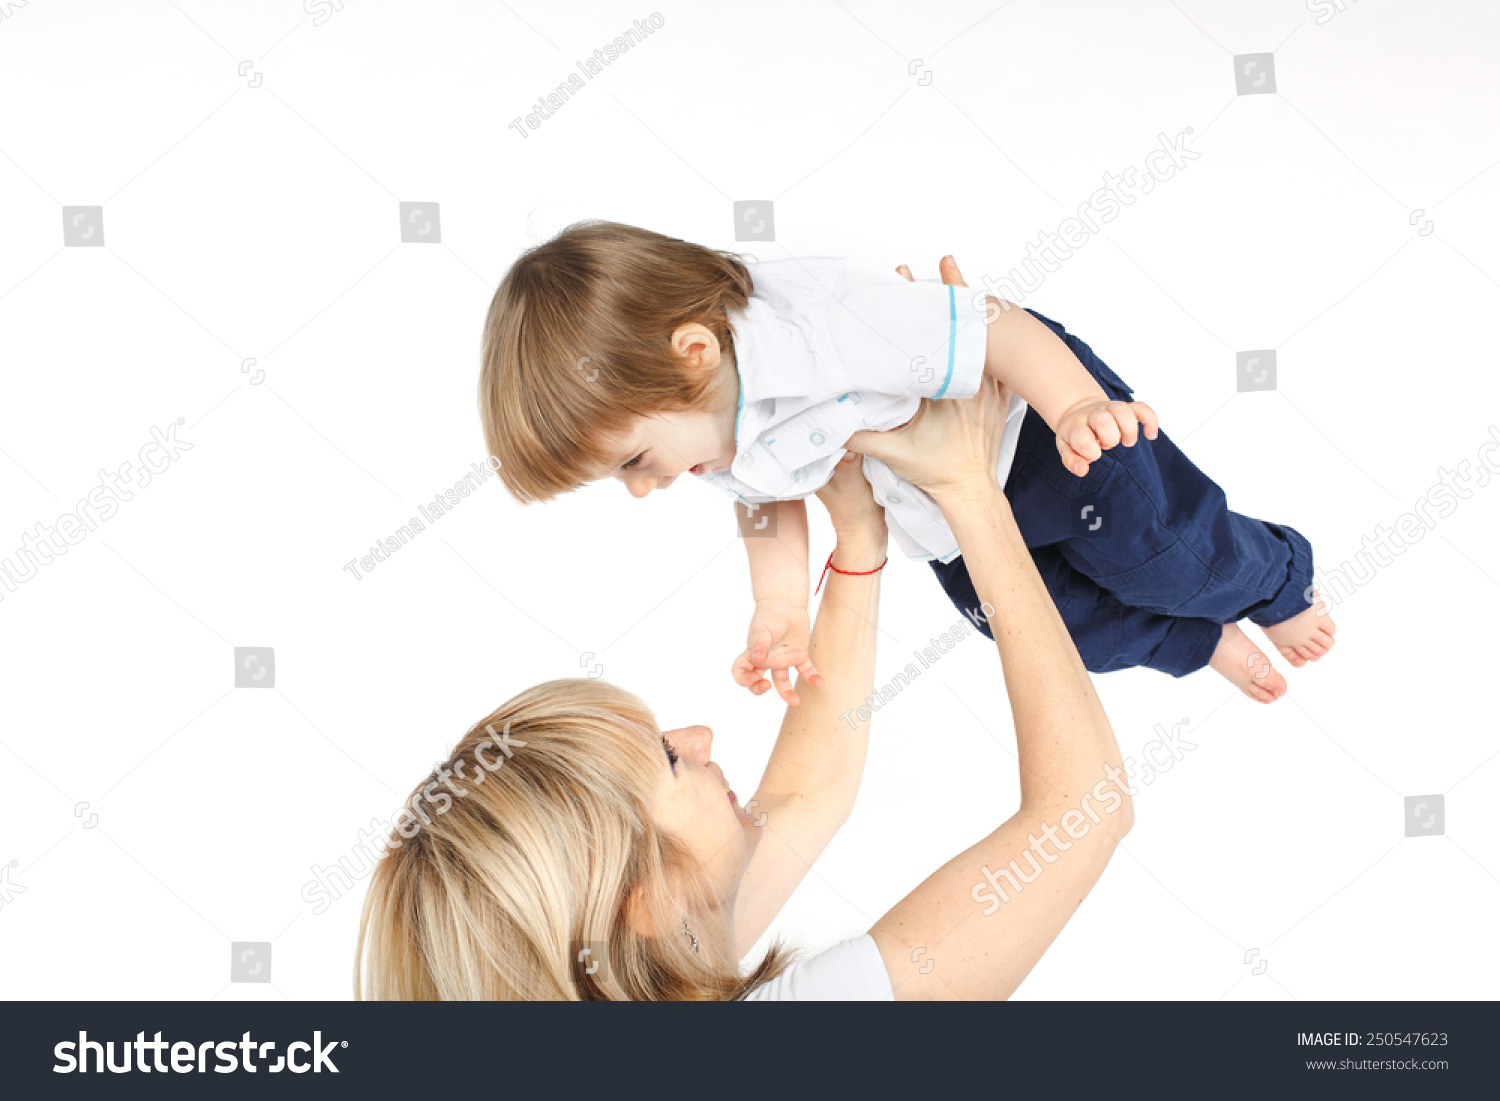 Happy Mother Holding And Lifting Up Her One Year Old Baby Boy Over ...